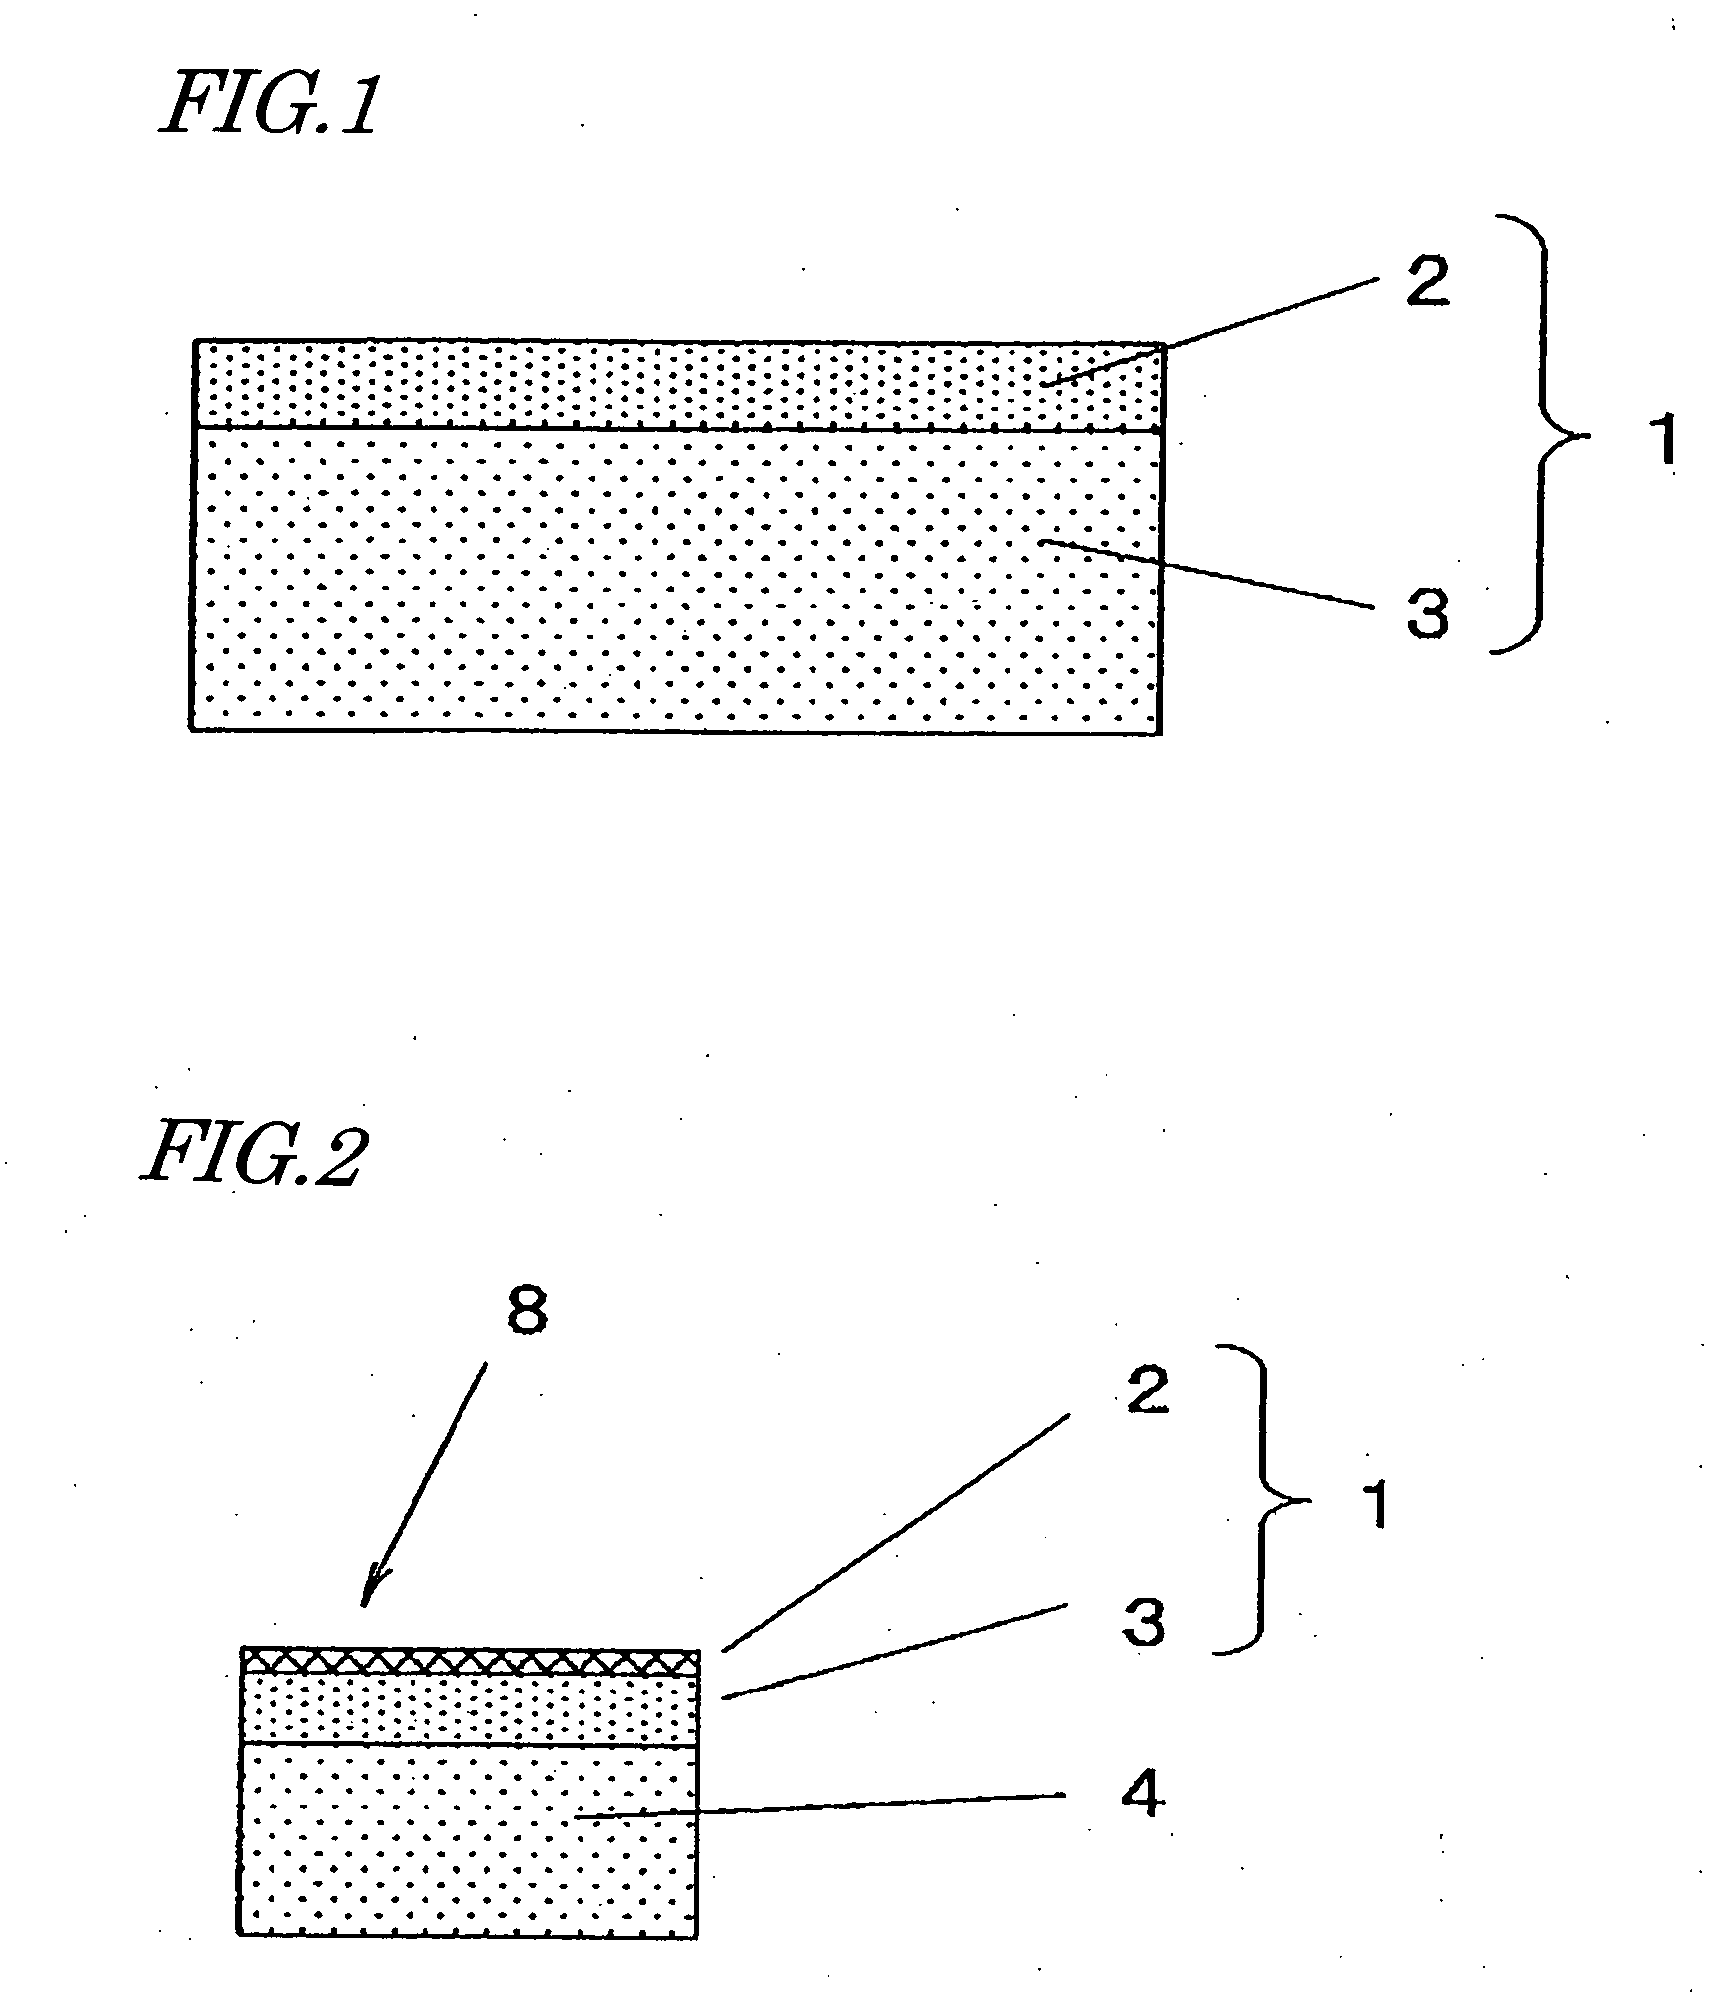 Acoustic matching layer, ultrasonic transmitter/receiver, and ultrasonic flowmeter